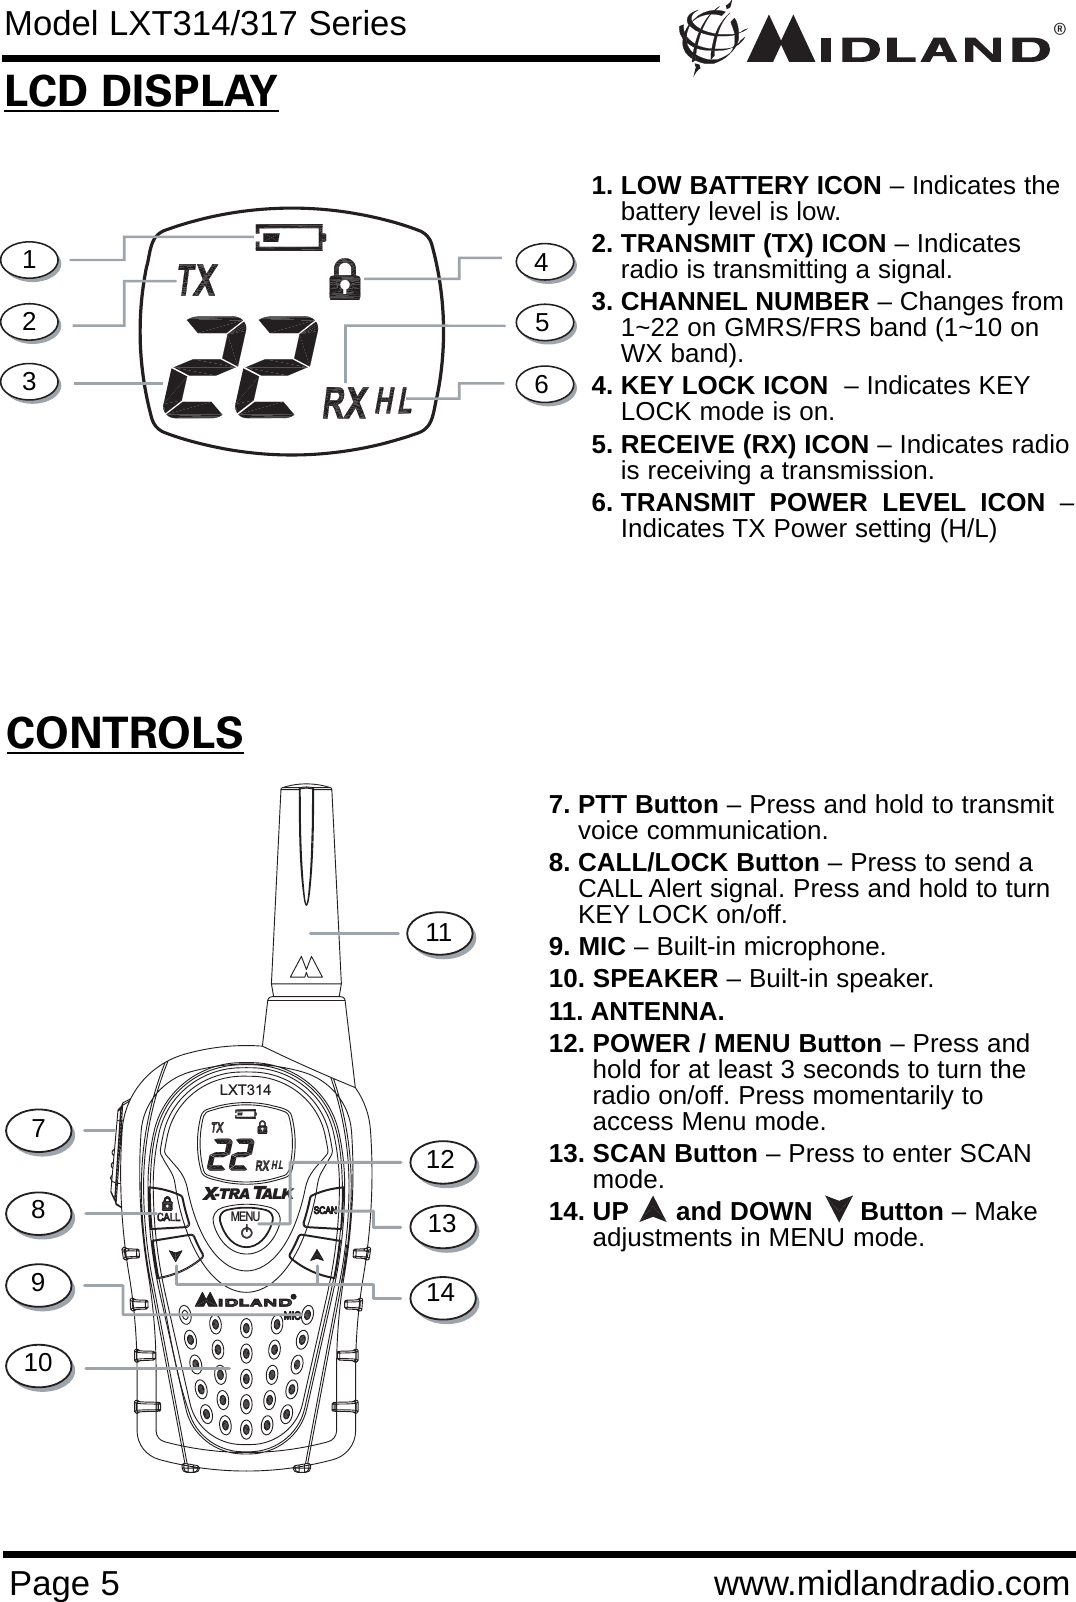 ®Page 5 www.midlandradio.com-TRA   ALKXTMENULXT314CONTROLSLCD DISPLAY1. LOW BATTERY ICON – Indicates thebattery level is low.2. TRANSMIT (TX) ICON – Indicatesradio is transmitting a signal.3. CHANNEL NUMBER – Changes from1~22 on GMRS/FRS band (1~10 onWX band).4. KEY LOCK ICON  – Indicates KEYLOCK mode is on.5. RECEIVE (RX) ICON – Indicates radiois receiving a transmission. 6. TRANSMIT POWER LEVEL ICON –Indicates TX Power setting (H/L)7. PTT Button – Press and hold to transmitvoice communication. 8. CALL/LOCK Button – Press to send aCALL Alert signal. Press and hold to turnKEY LOCK on/off.9. MIC – Built-in microphone.10. SPEAKER – Built-in speaker.11. ANTENNA.12. POWER / MENU Button – Press andhold for at least 3 seconds to turn theradio on/off. Press momentarily toaccess Menu mode. 13. SCAN Button – Press to enter SCANmode. 14. UP and DOWN      Button – Makeadjustments in MENU mode.1234567891014131211Model LXT314/317 Series